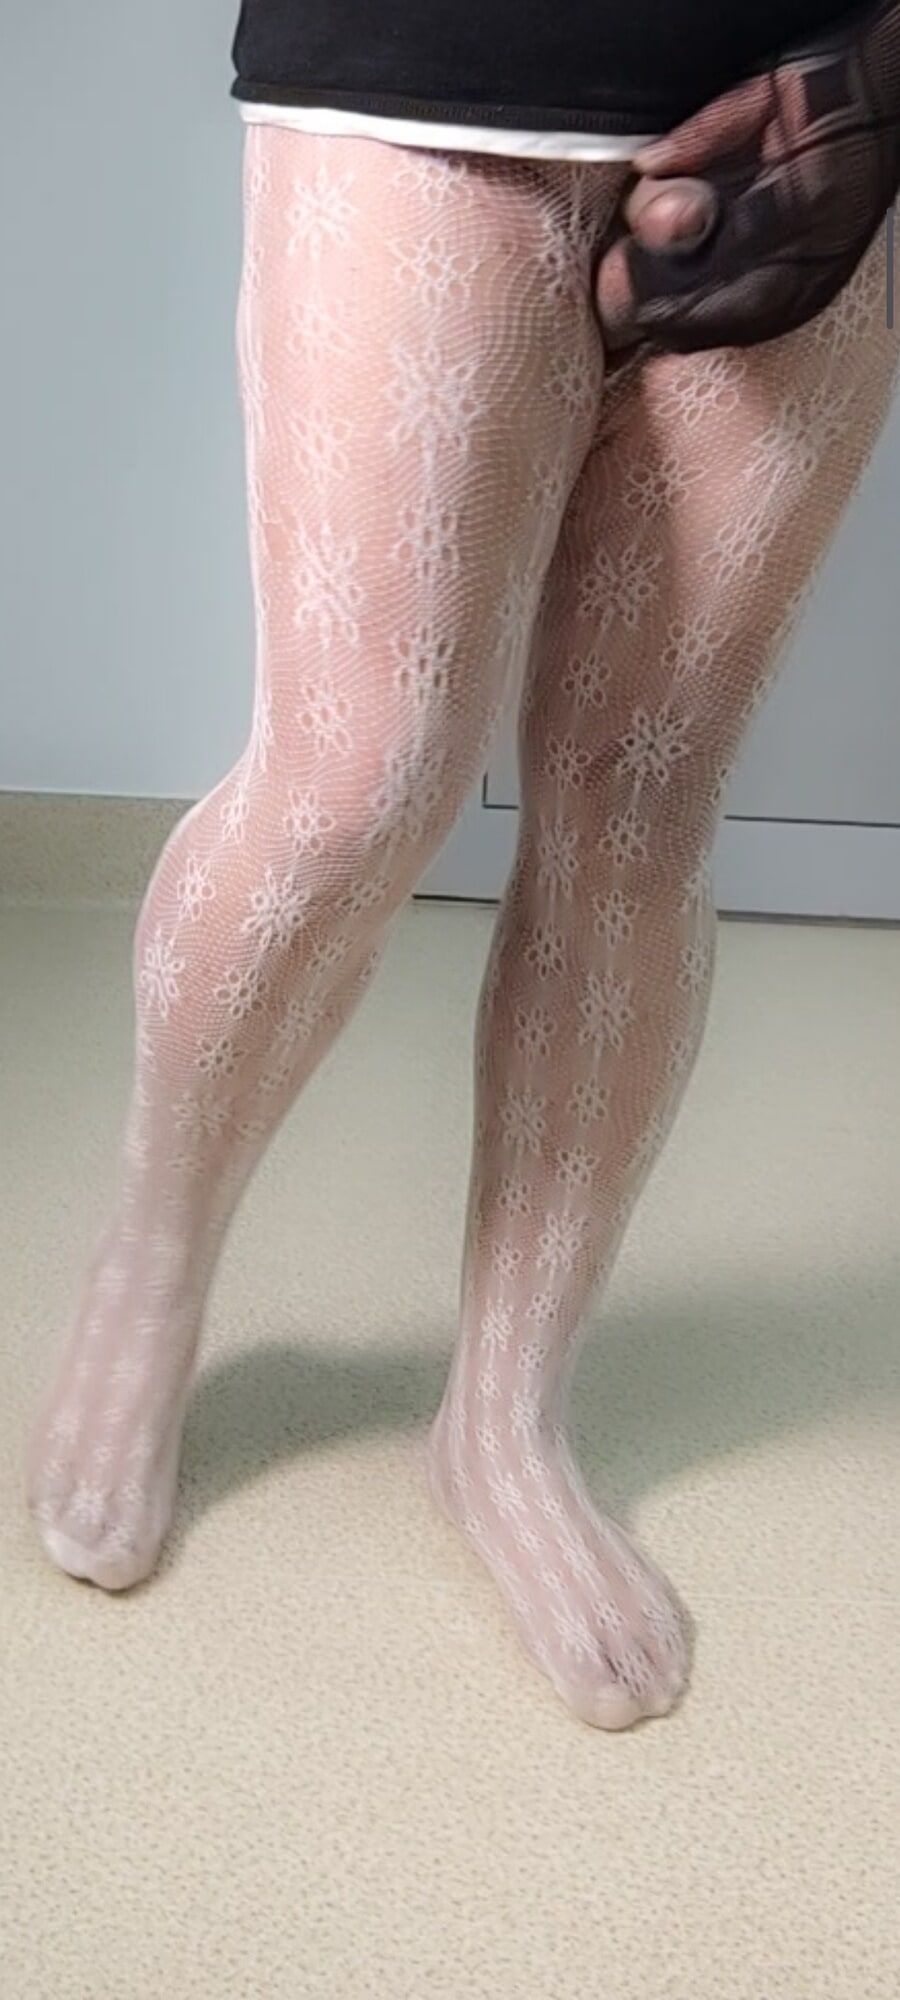 Wank cock in patterned sexy pantyhose #13